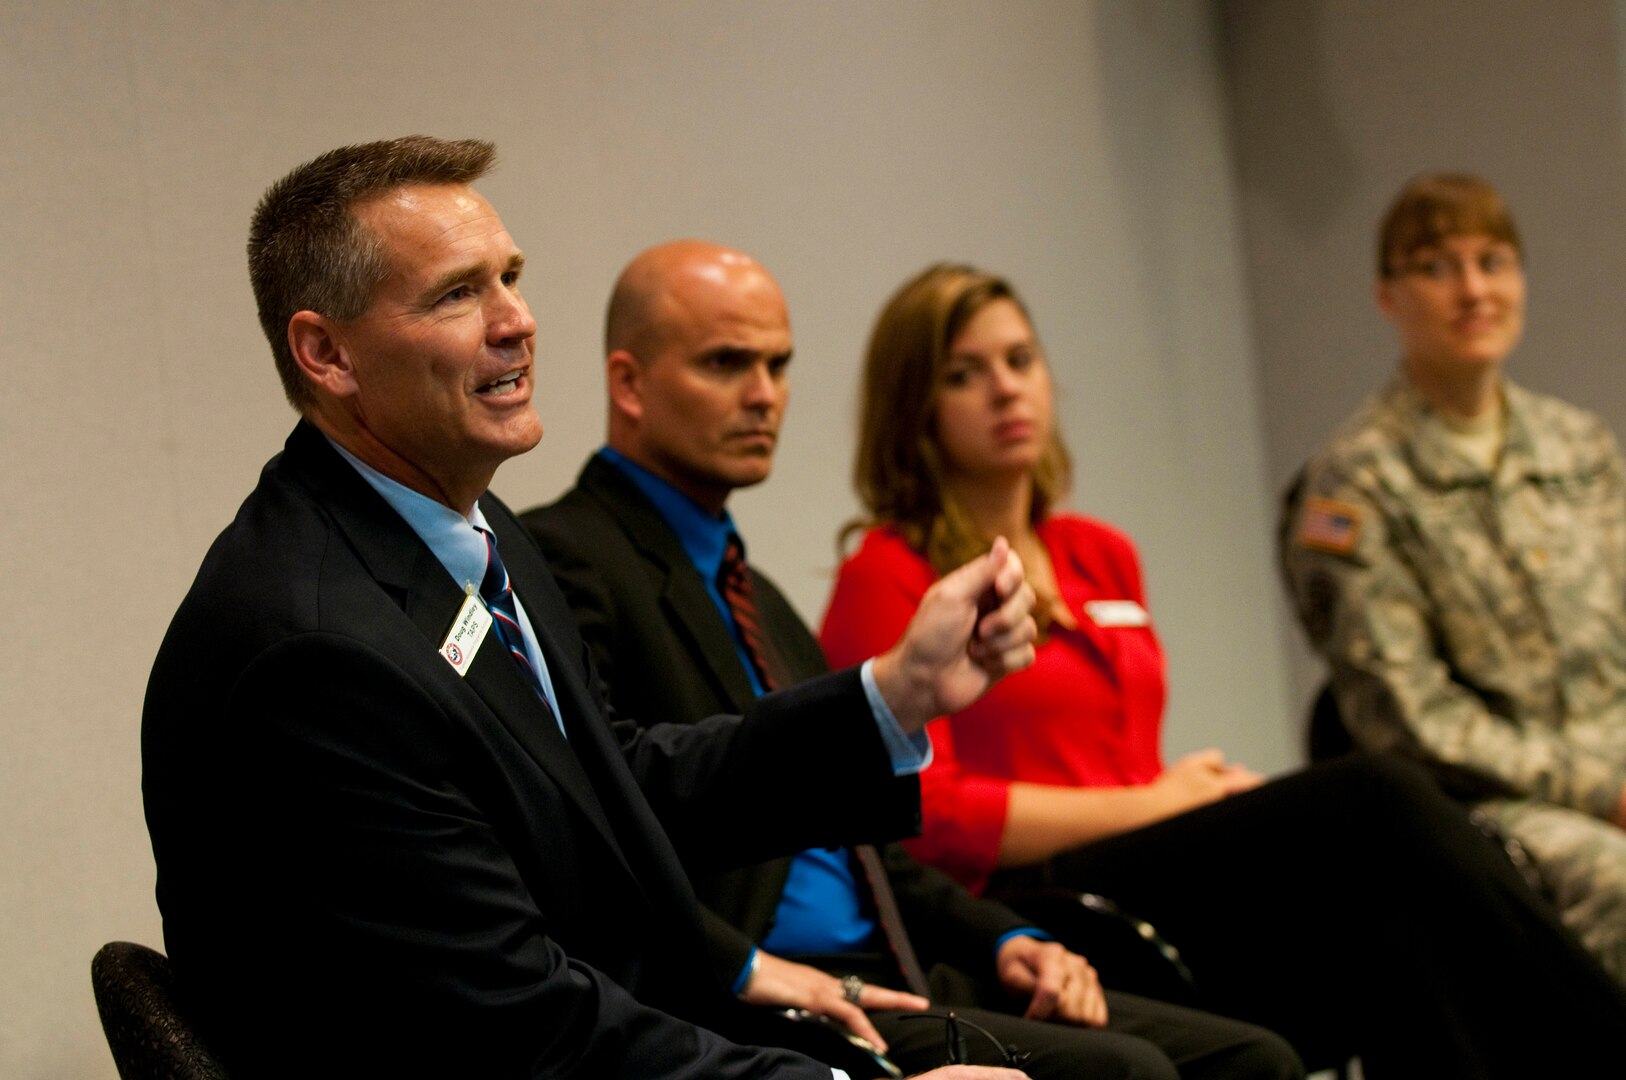 Doug Windley, the military installations program manager for the Tragedy Assistance Program for Survivors, TAPS, and other panelists talk about their personal struggles with suicide during a Suicide Prevention and Awareness Month panel discussion Sept. 16, 2014, at Arlington Hall in Arlington, Va. Windley and other panelists shared with the group what saved them from suicide and discussed at length the importance of asking for help with mental health issues.